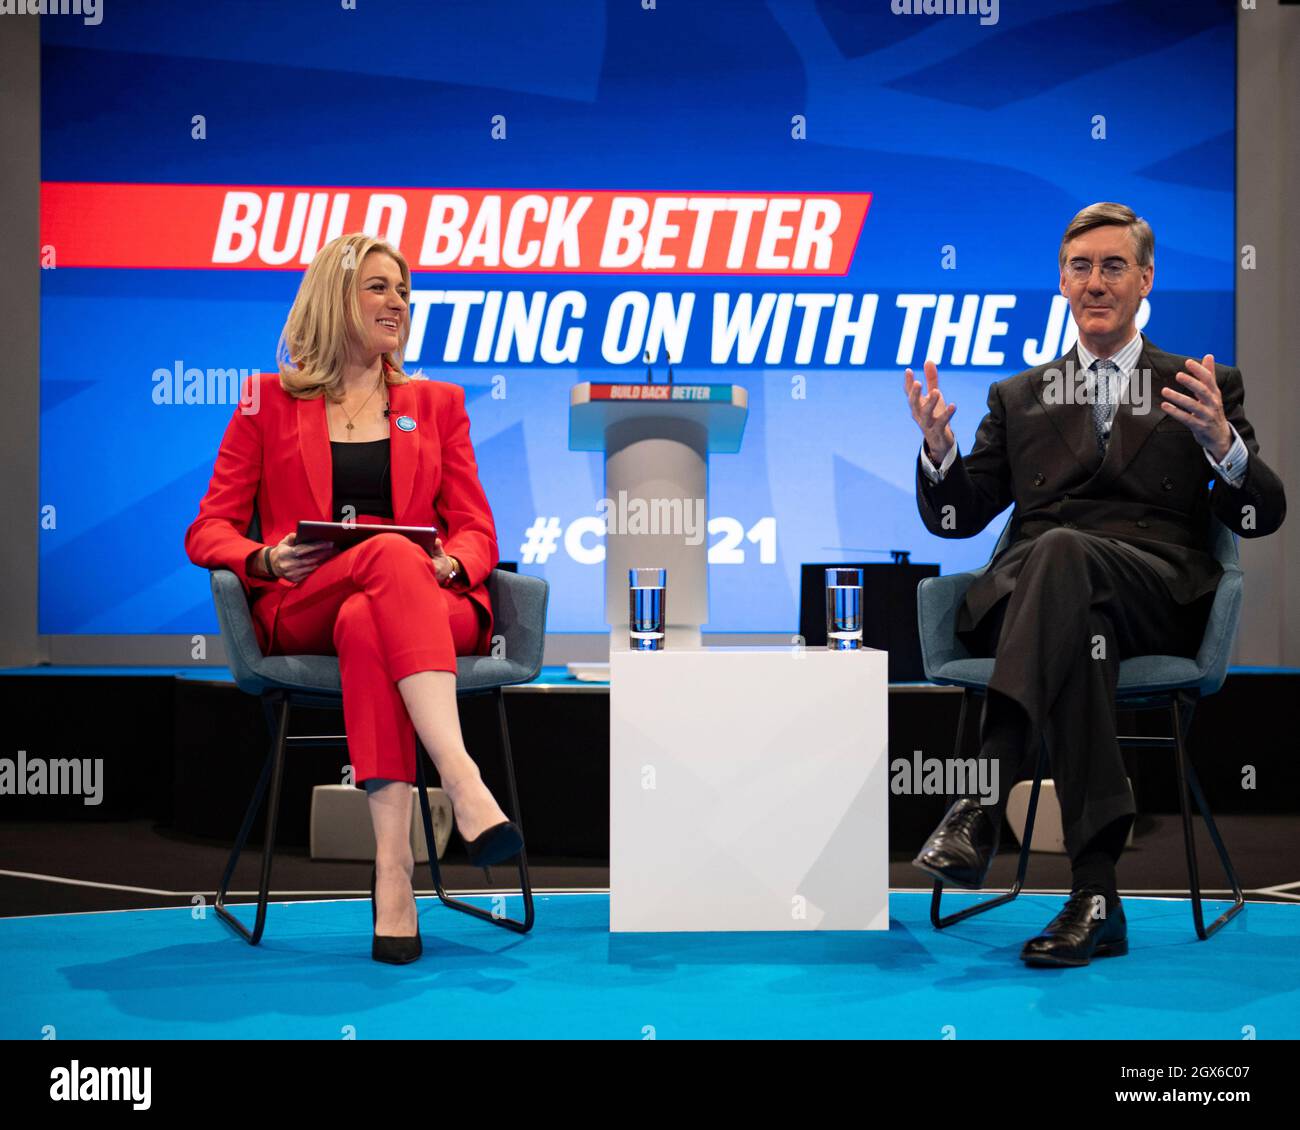 Manchester, England, UK. 4th Oct, 2021. PICTURED: Rt Hon Jacob Rees-Mogg MP speaks to conference, at the Conservative party Conference #CPC21. Credit: Colin Fisher/Alamy Live News Stock Photo